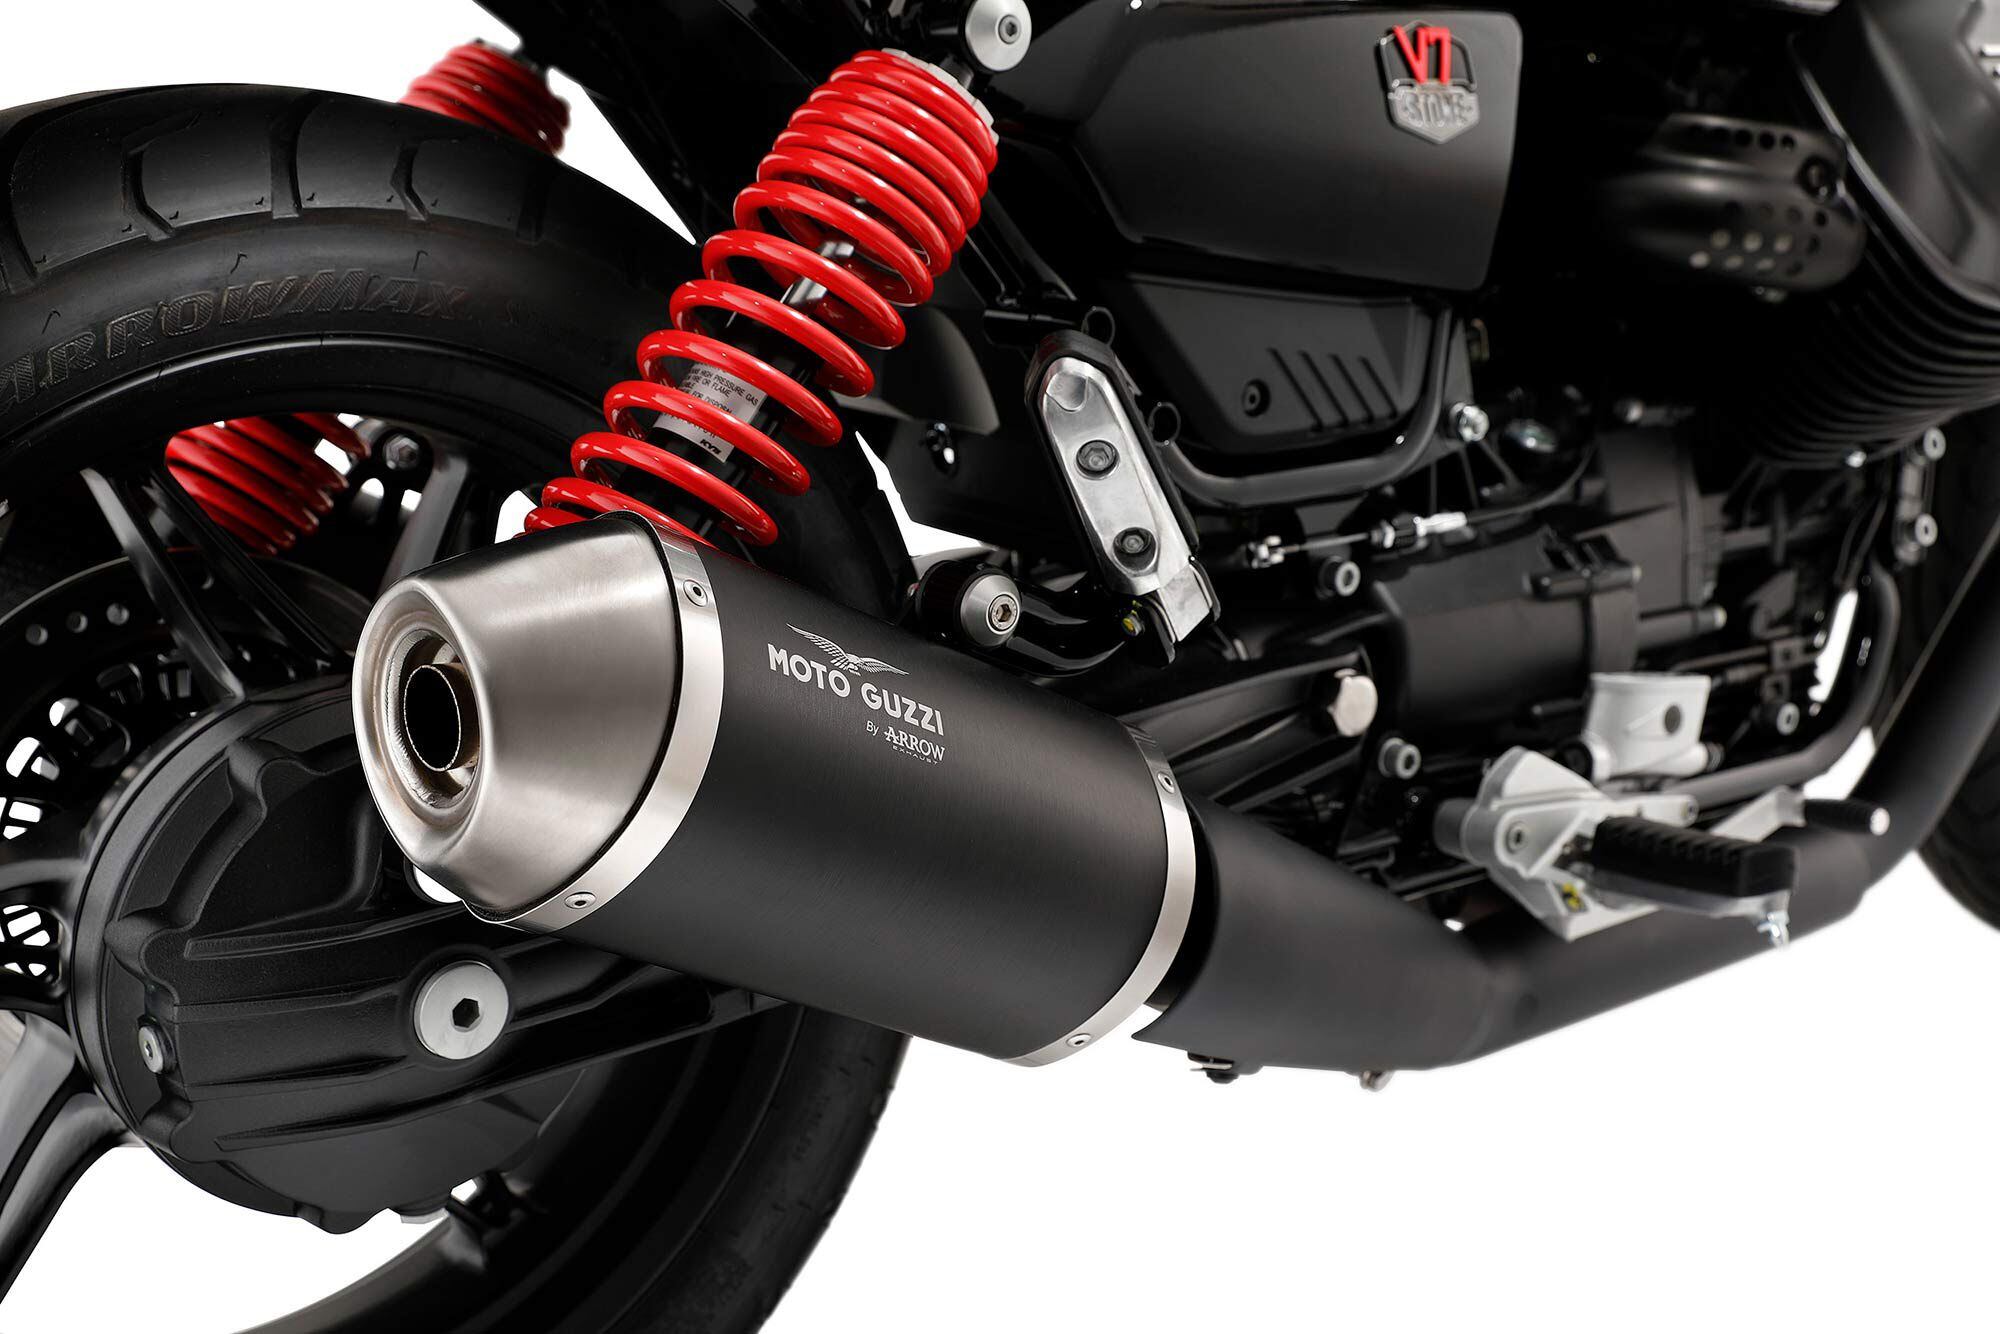 The red shock springs also bring some color to the rear end, but the V7 Stone Special Edition’s new Arrow exhaust is the headline news. The new pipe is said to boost power and torque.